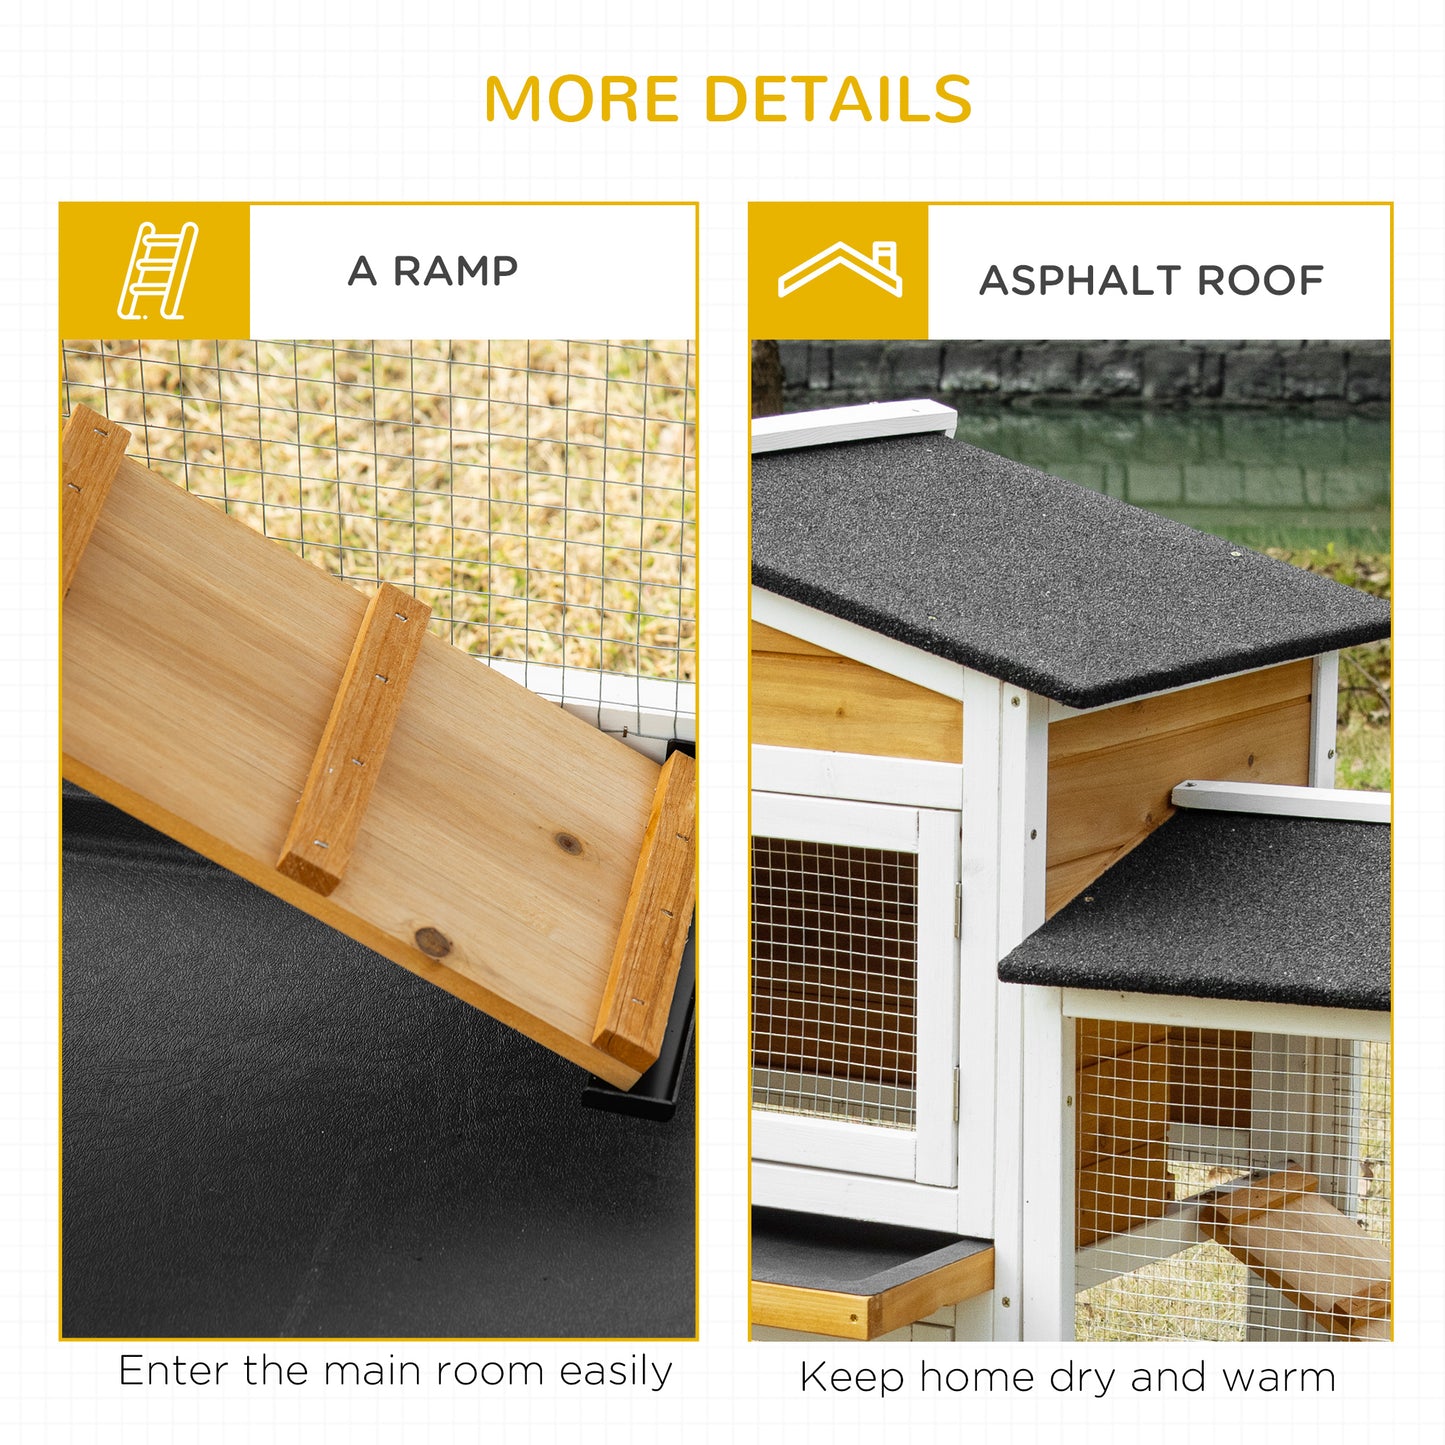 PawHut 2 Tier Wooden Rabbit Hutch, Guinea Pig Cage, Bunny Run, Small Animal House with Double Side Run Boxes, Slide-out Tray, Ramp, 230 x 53 x 93.5cm